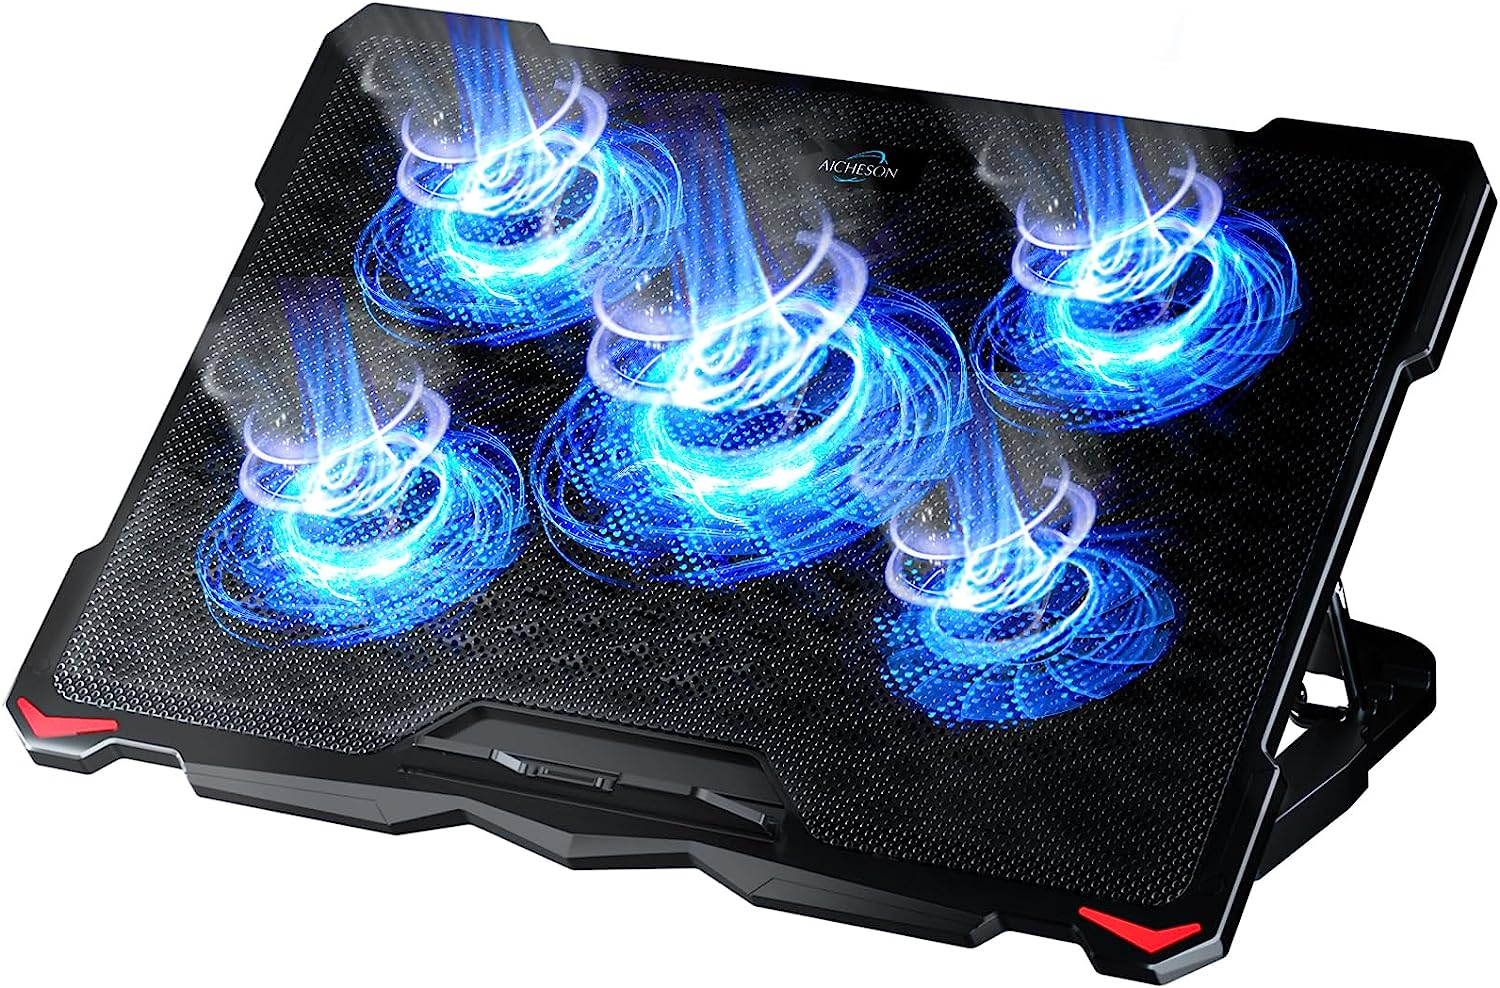 AICHESON Laptop Cooling Pad 5 Fans Up to 17.3 Inch [...]